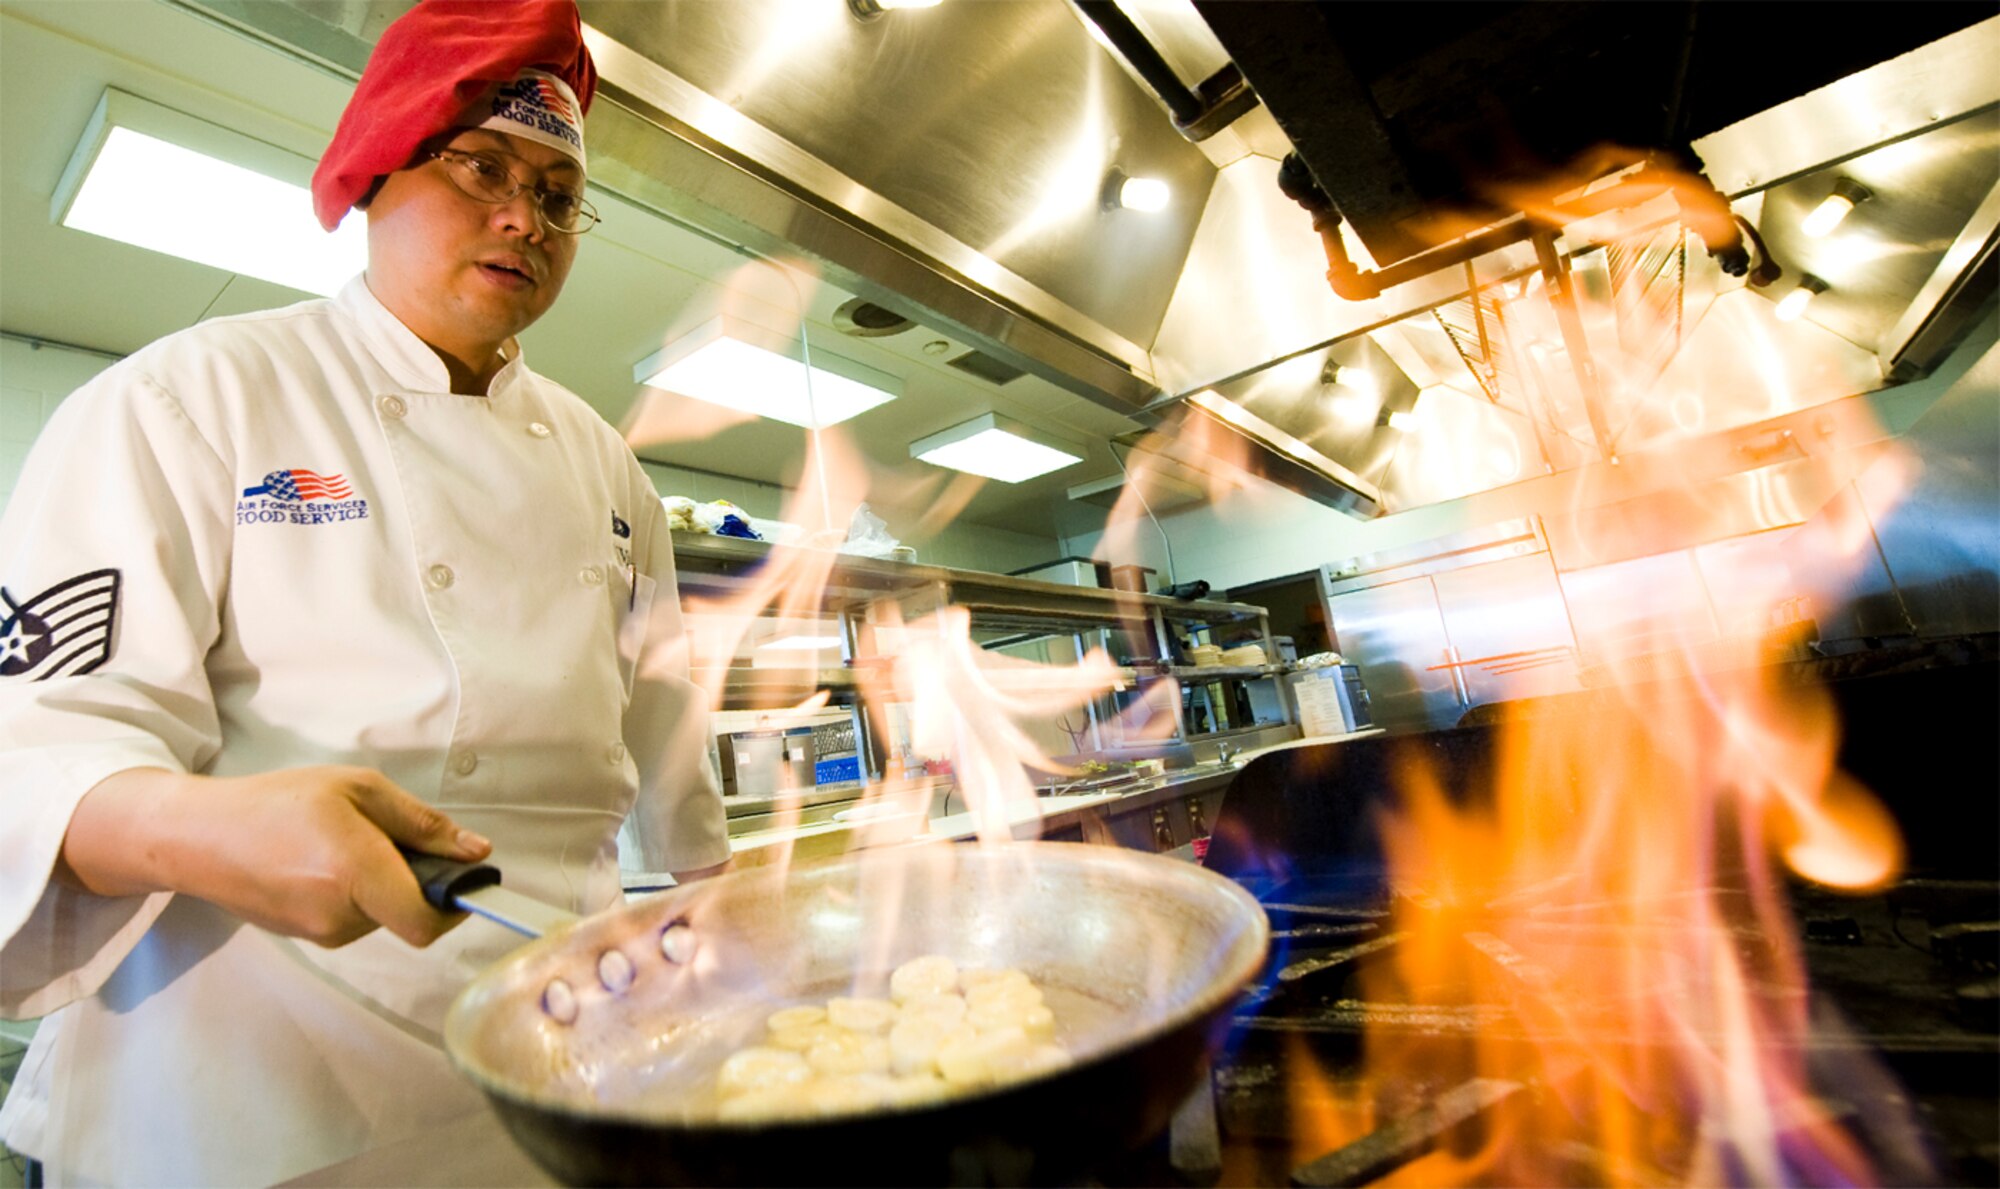 Working over a hot flaming stove is nothing new for seasoned chef Tech. Sgt. Rhodello Nuval. He says the main thing he has to guard against is complacency because he is so comfortable in the kitchen. (photo by Tech. Sgt. Matthew Hannen)